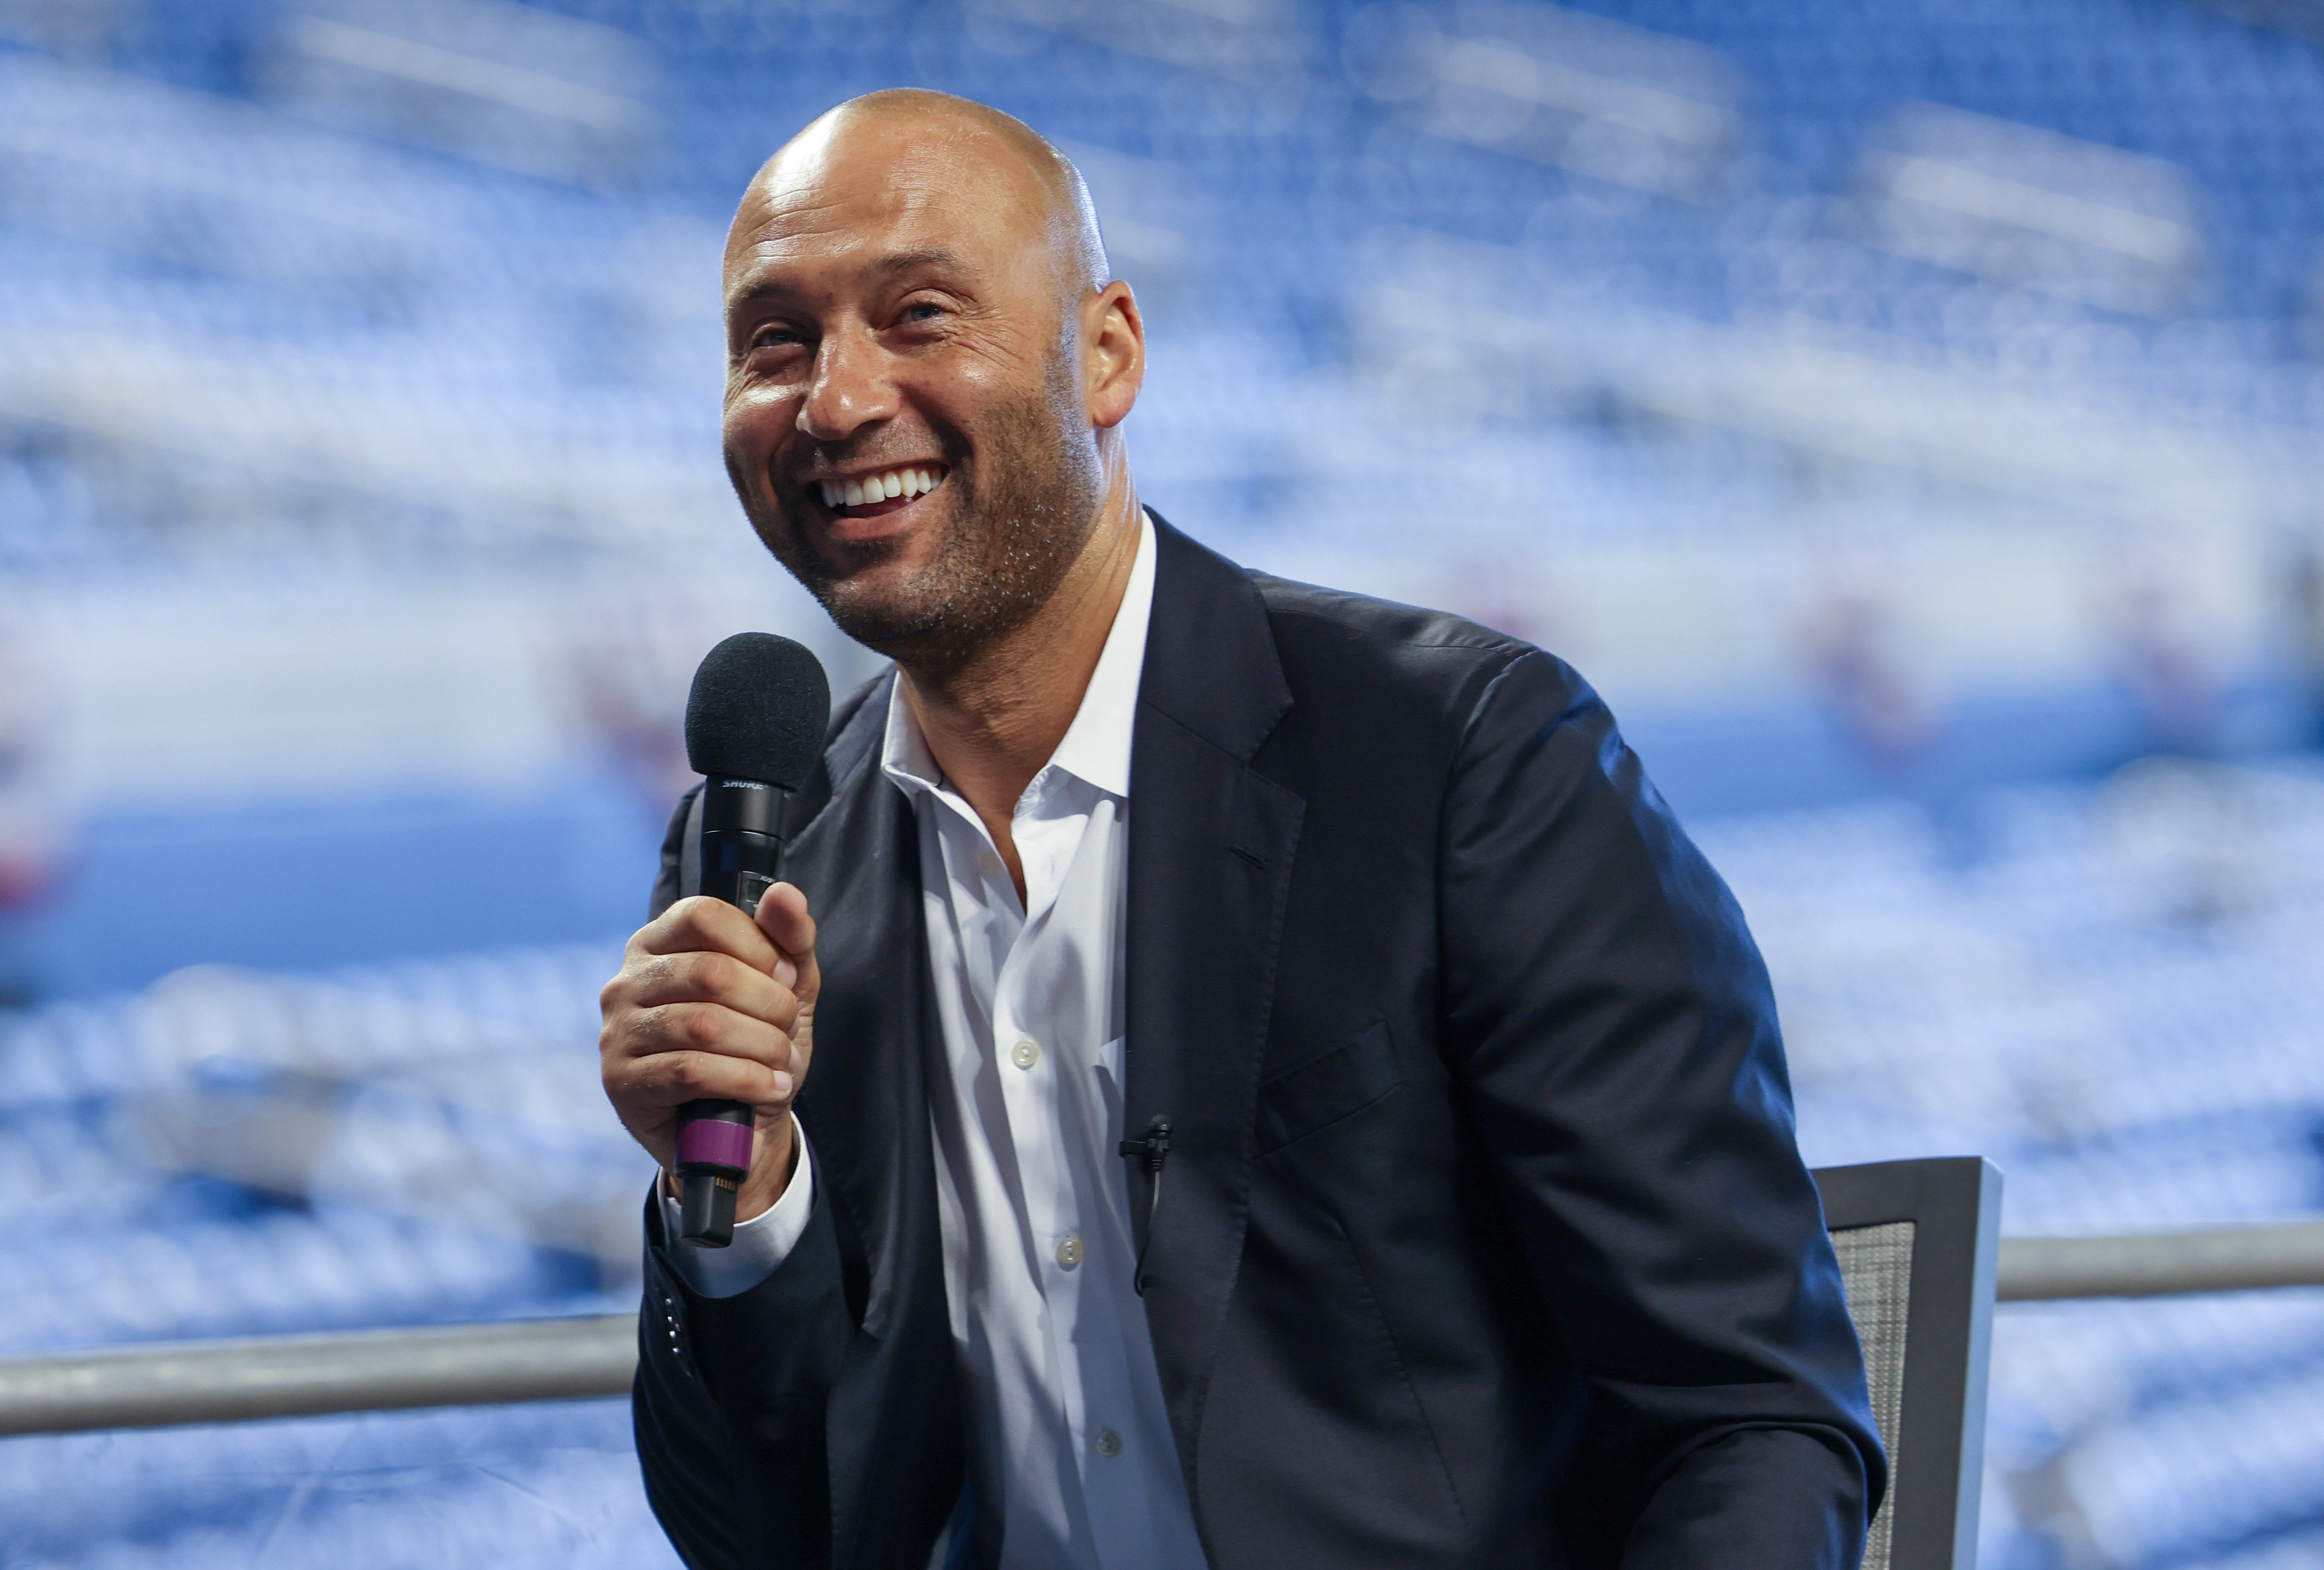 Derek Jeter, who own a few luxury houses, speaking to the media in Miami